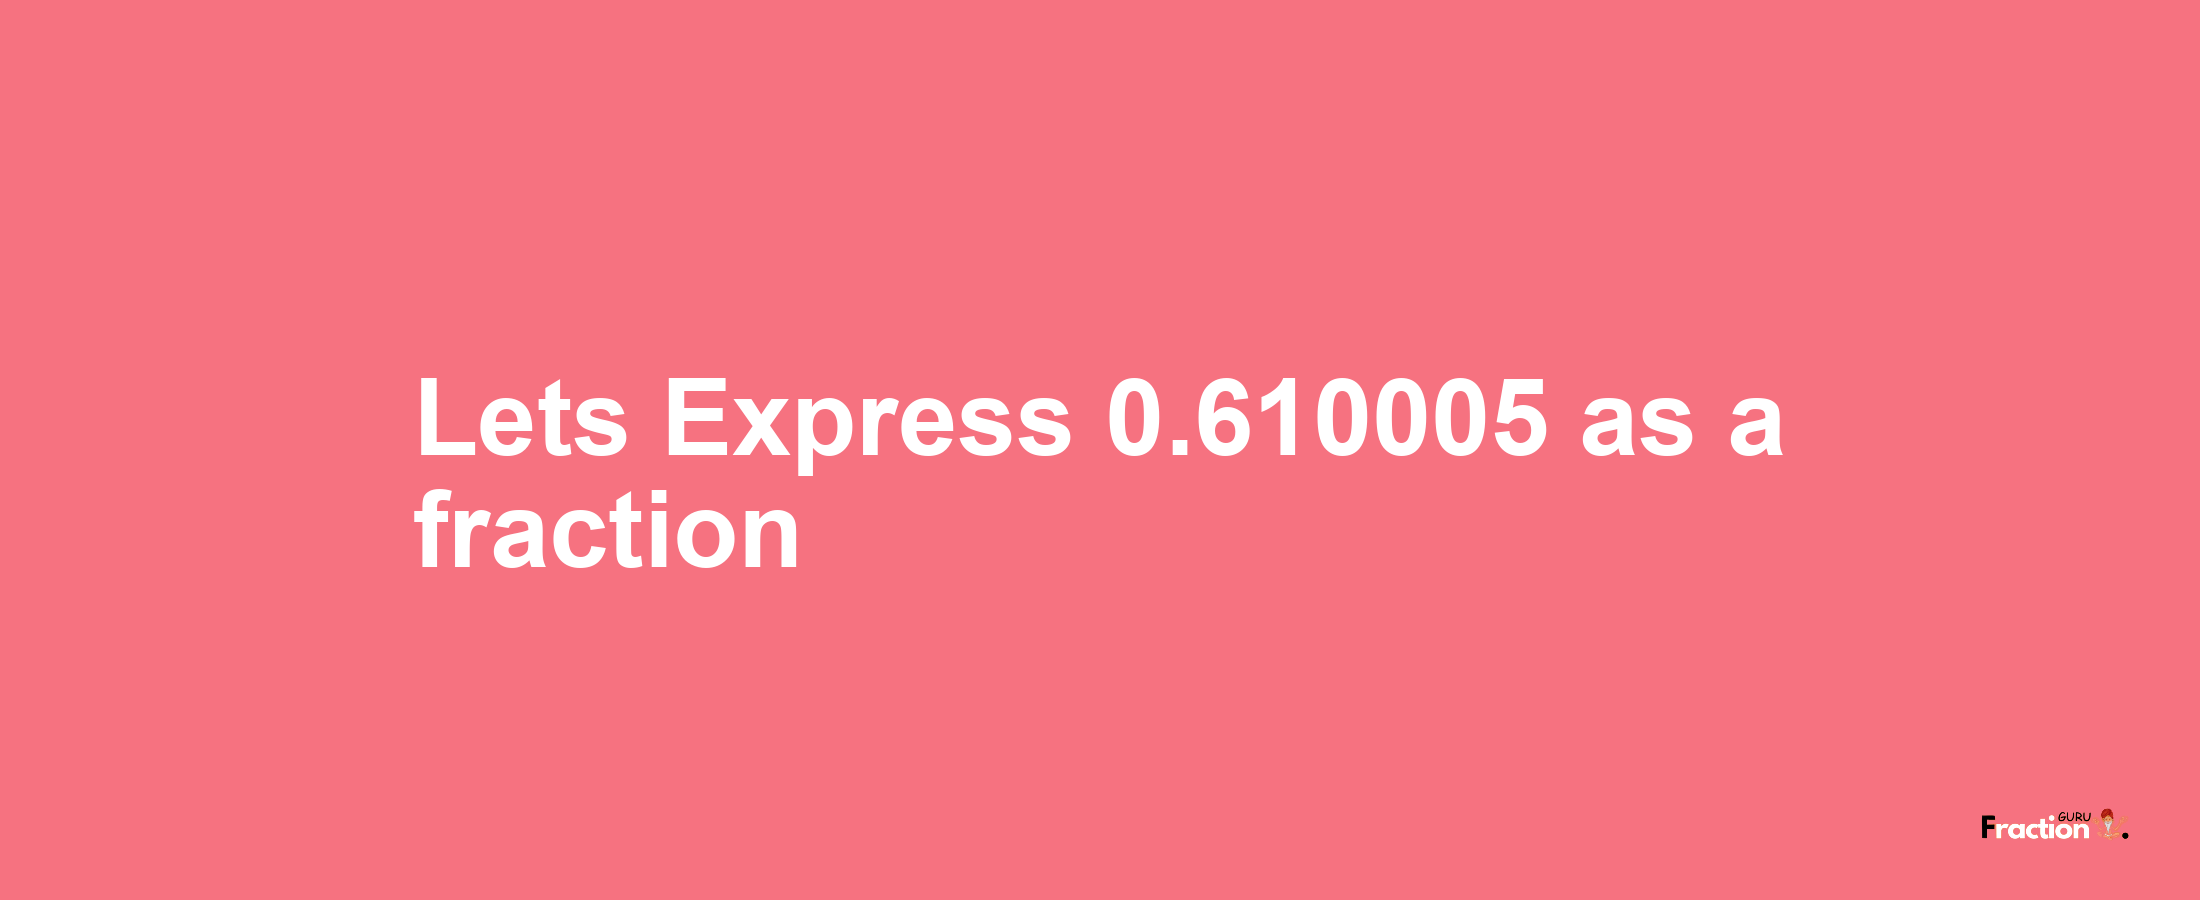 Lets Express 0.610005 as afraction